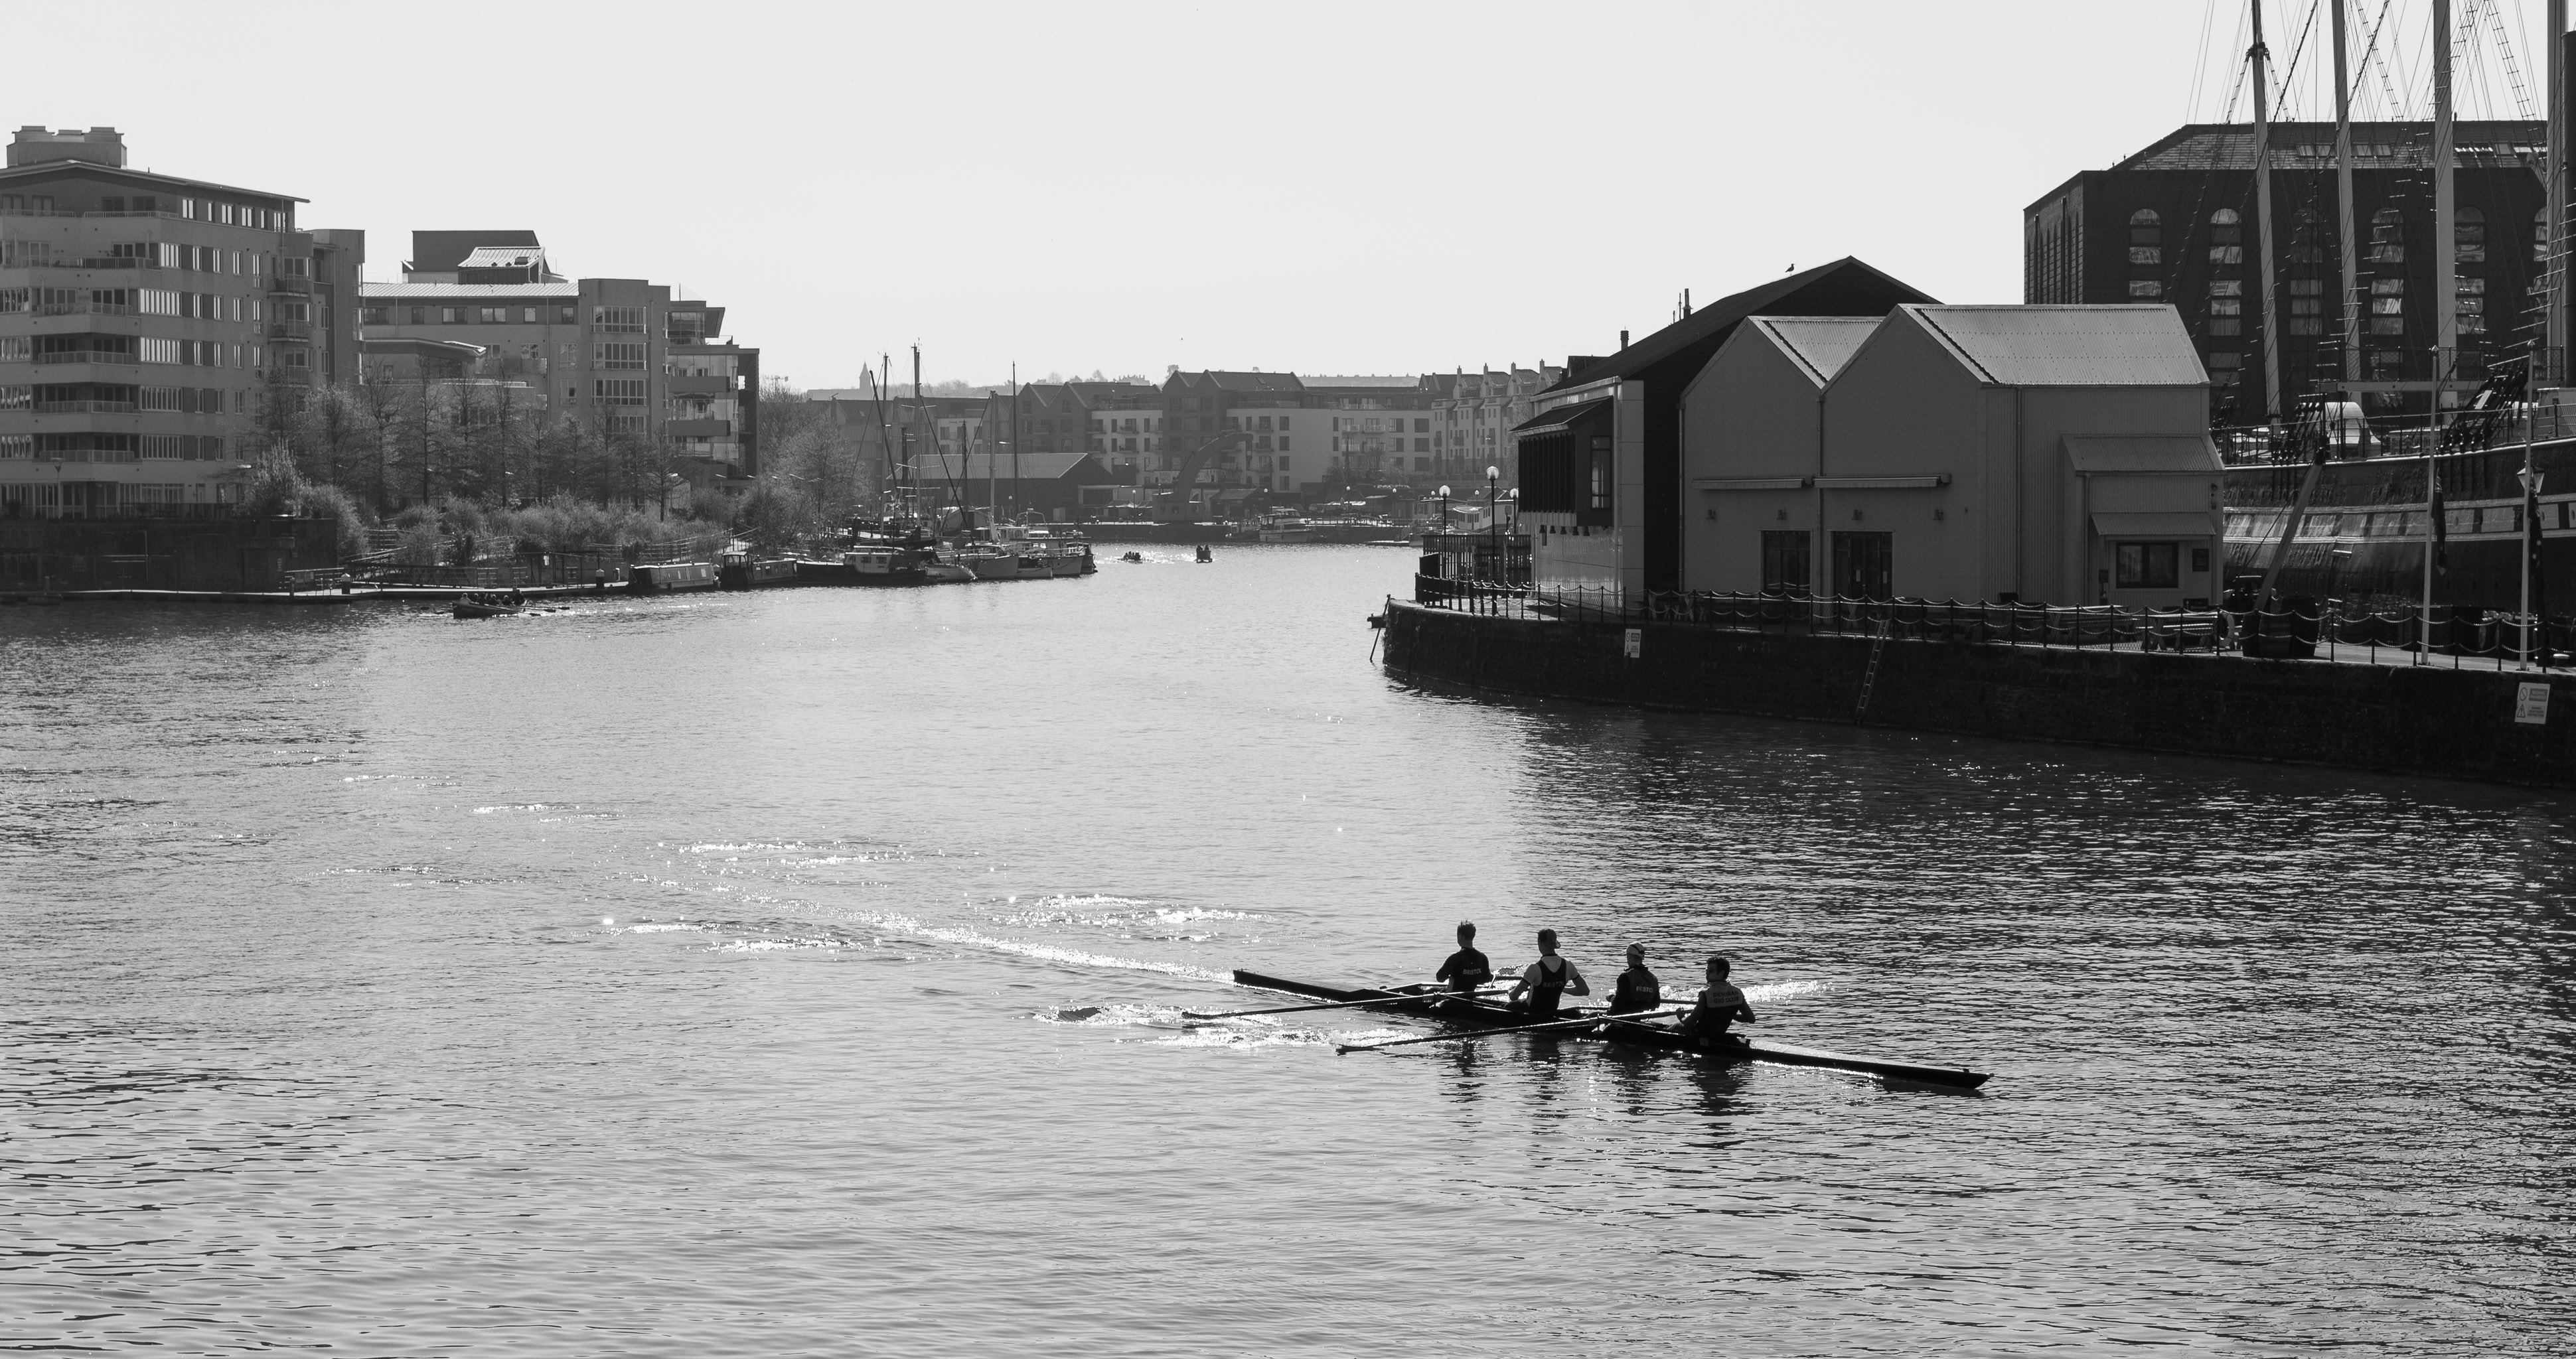 Coxless Four
